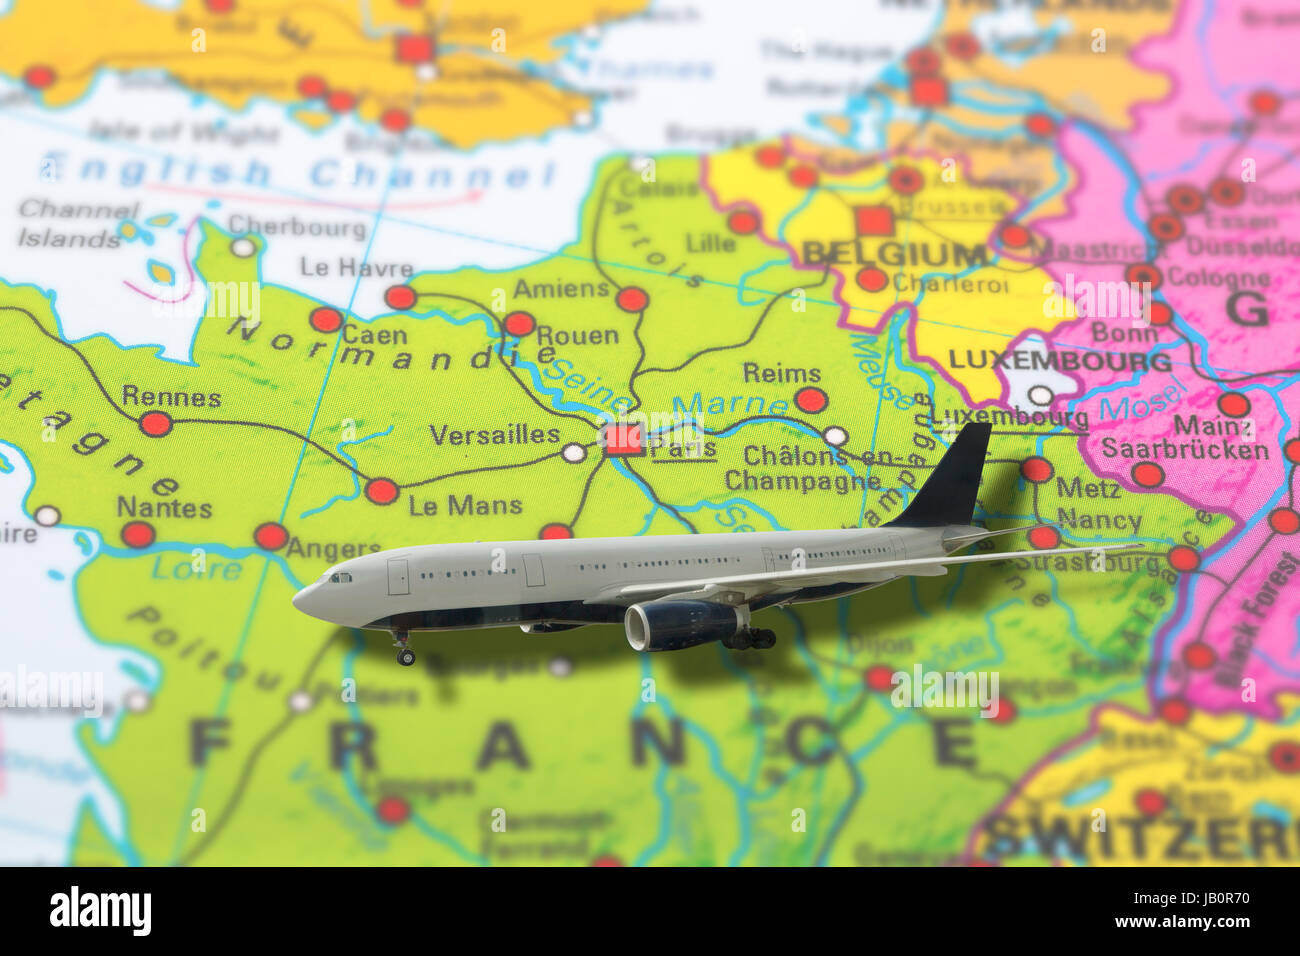 Paris in France pinned aircraft travelling on colorful political map of Europe. Geopolitical school atlas. Holidays and travel concept. Flights to Eur Stock Photo